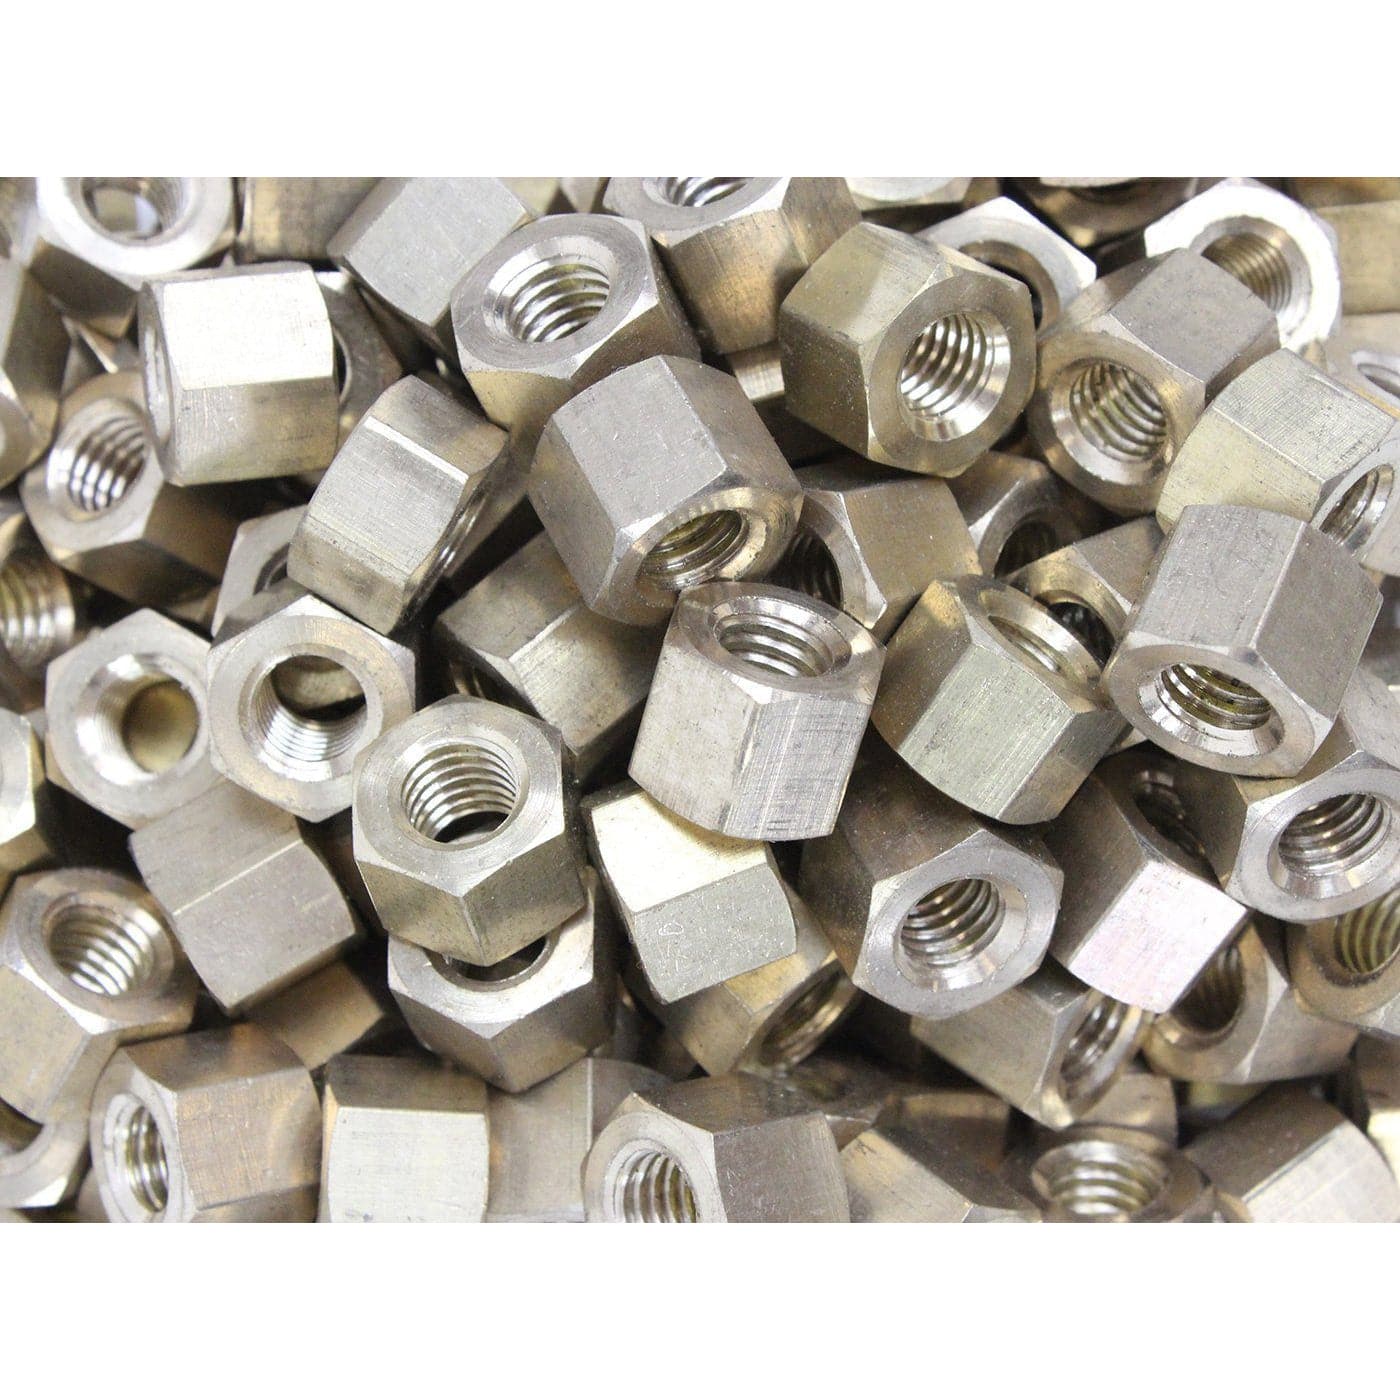 BVV Brass Nuts For High Pressure Clamps